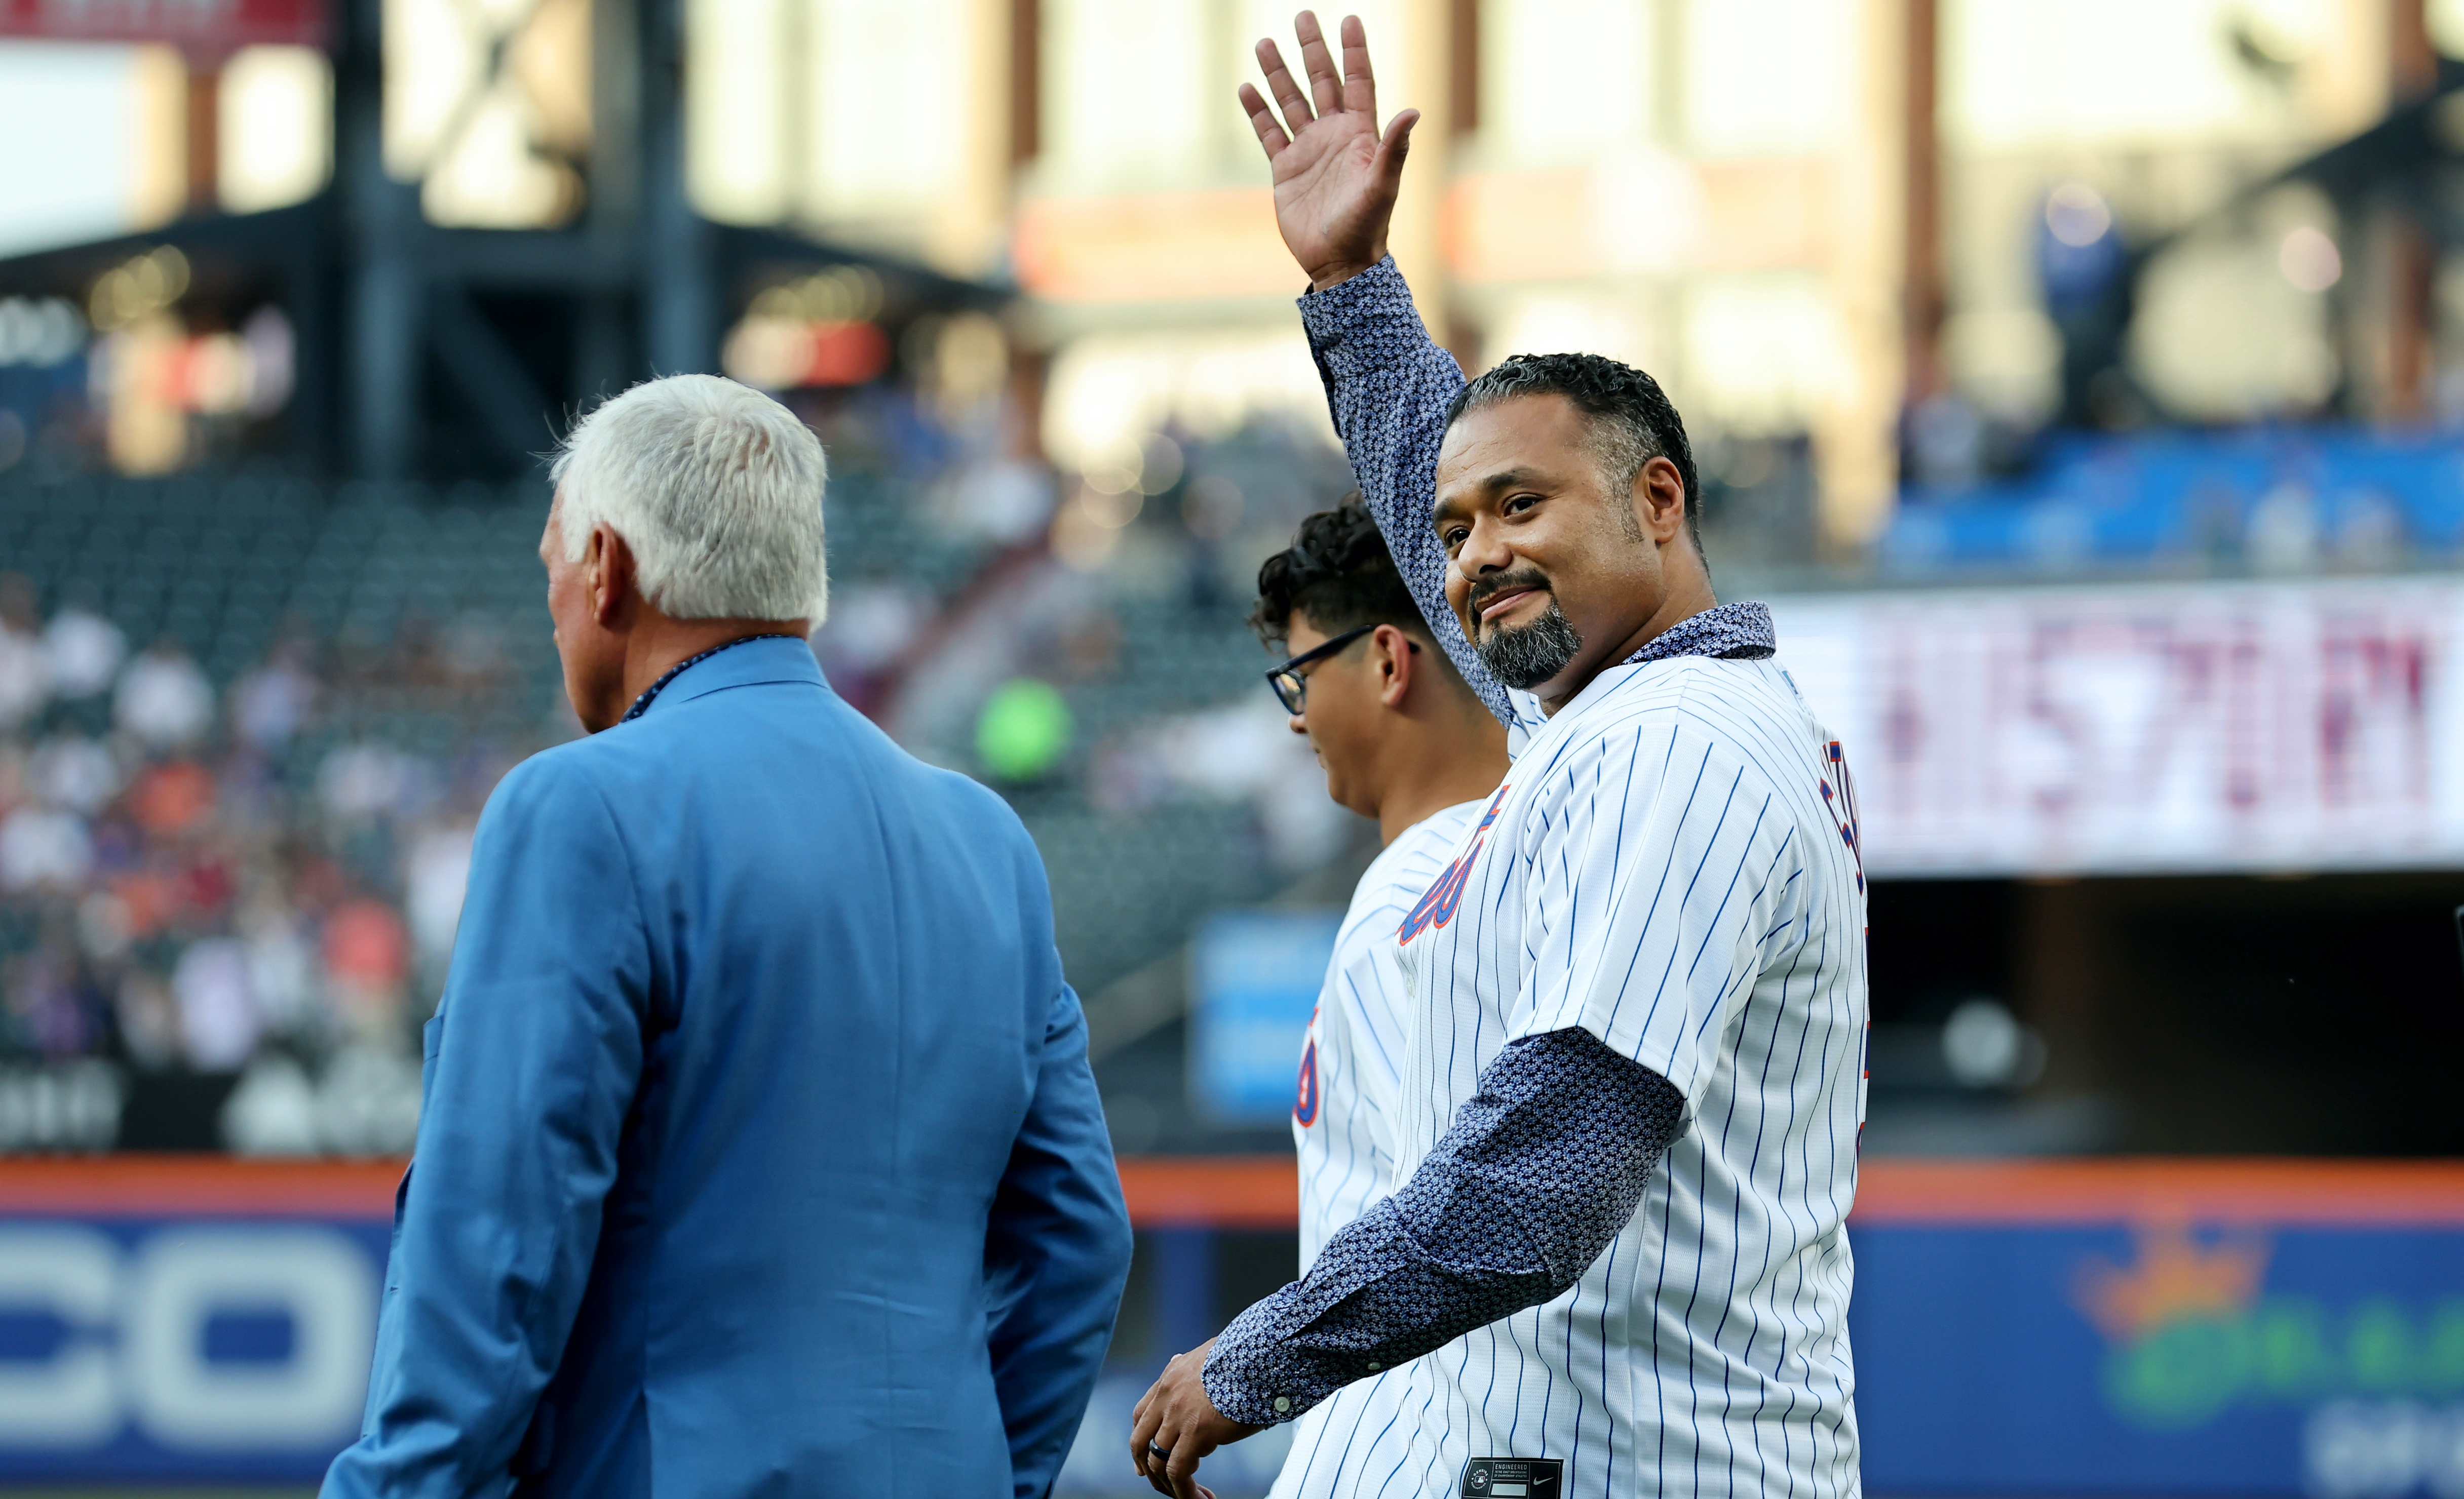 METS TO HONOR JOHAN SANTANA ON MAY 31 IN A PRE-GAME CEREMONY 10 YEARS AFTER  HIS HISTORIC NO-HITTER, by New York Mets